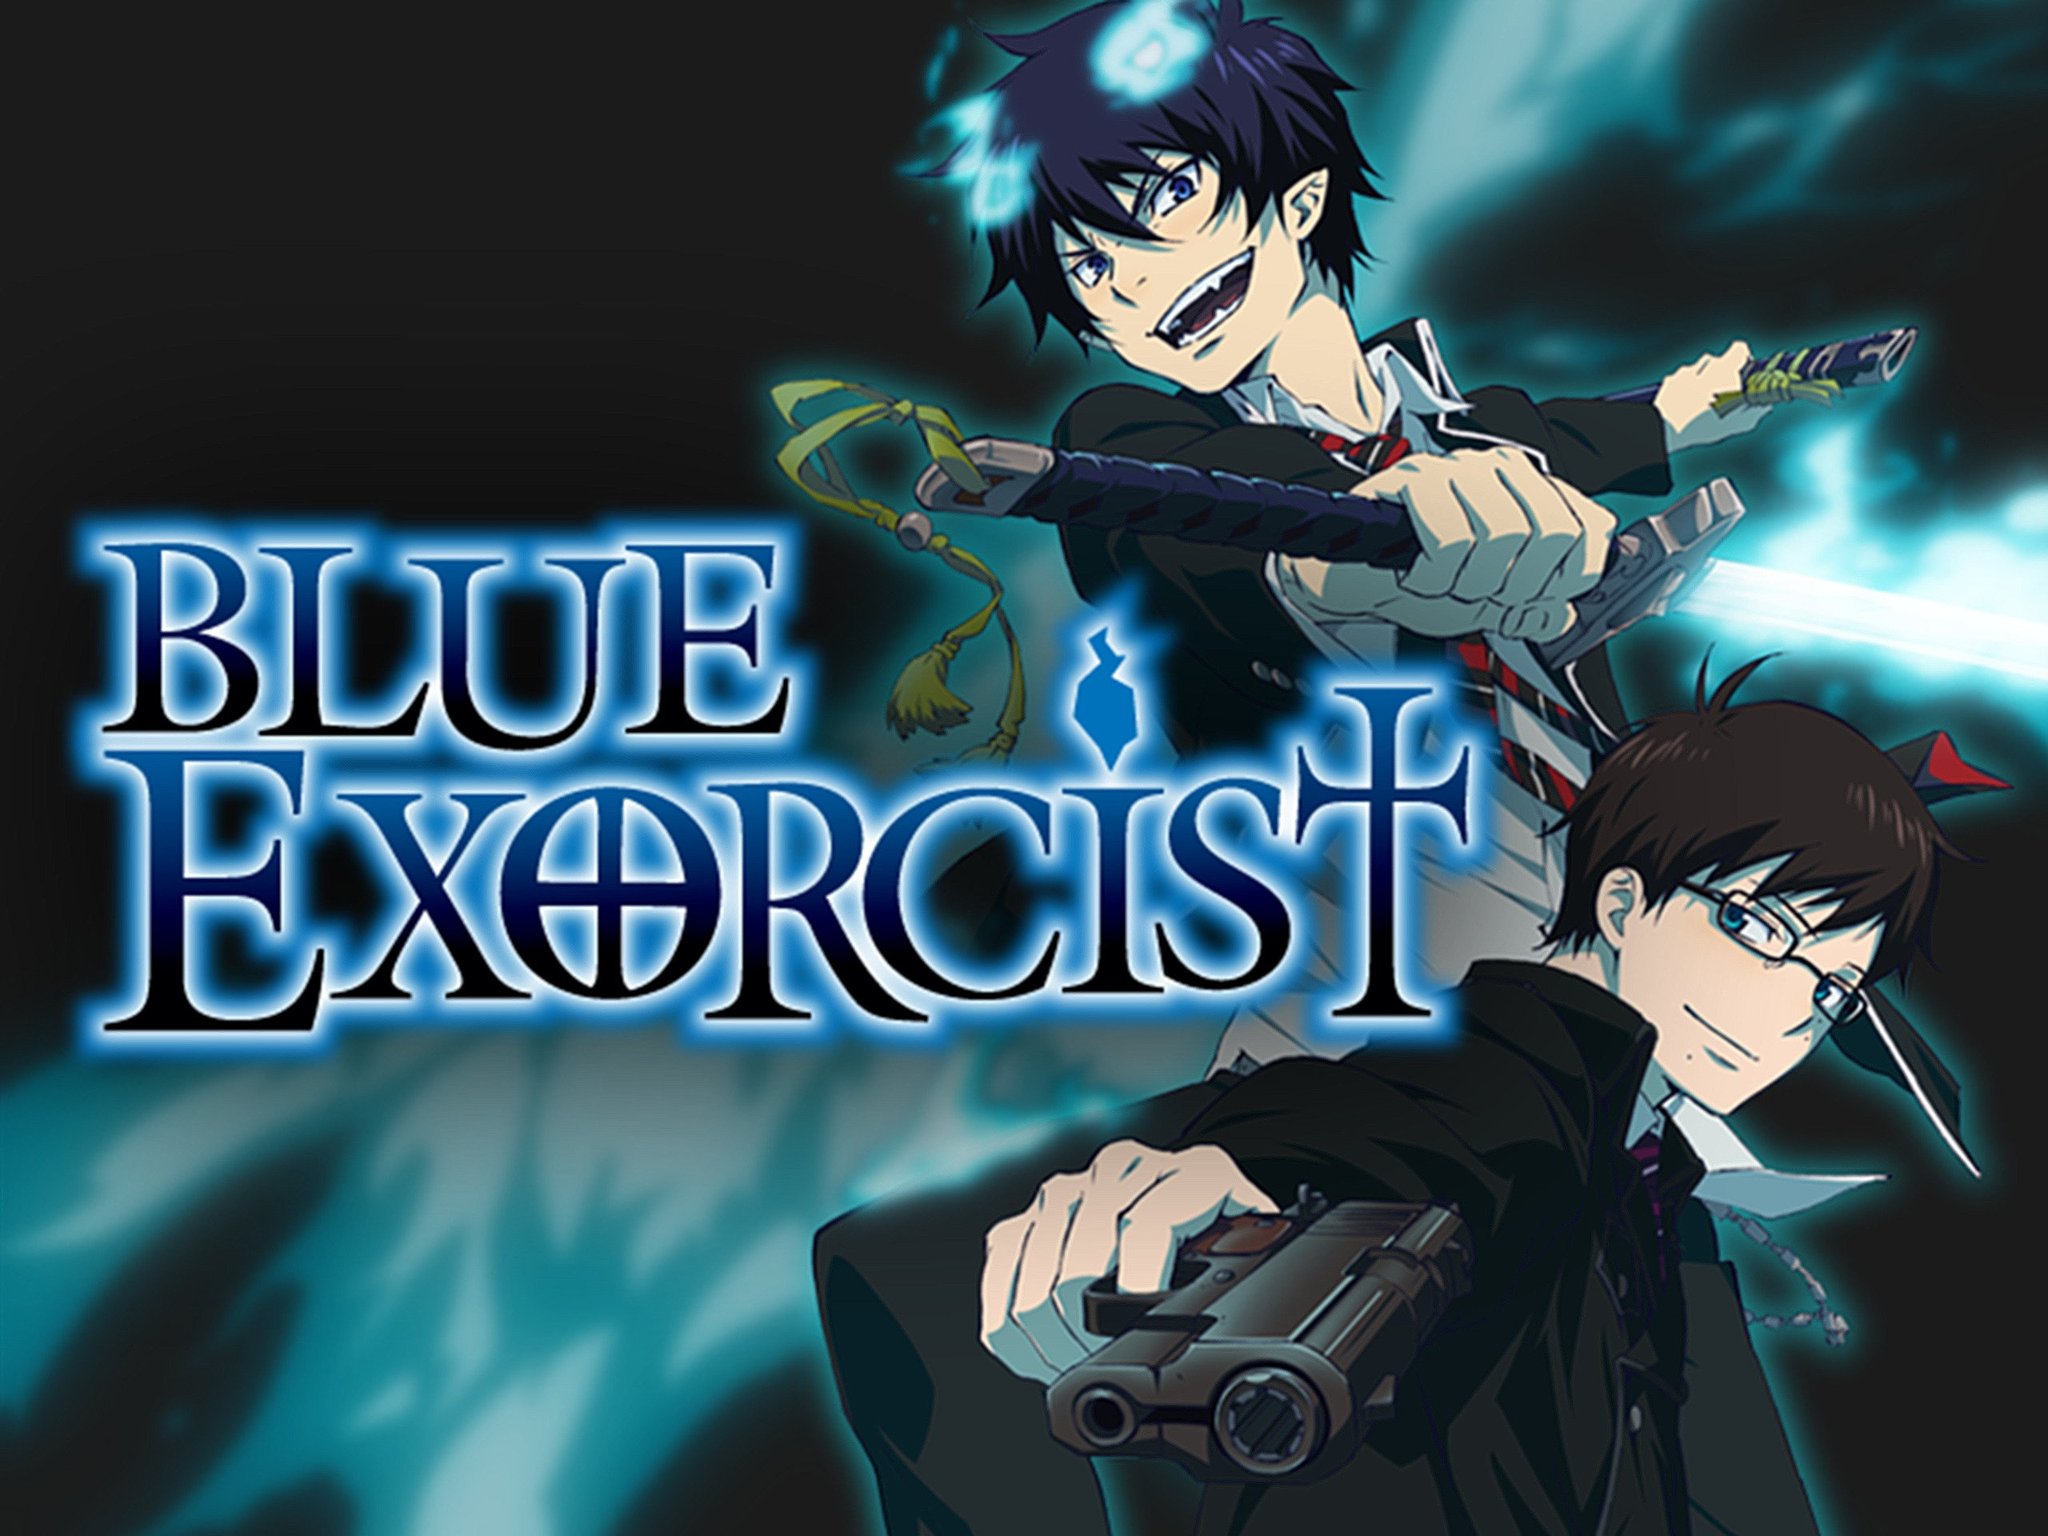 Daily Blue Exorcist on Twitter: 